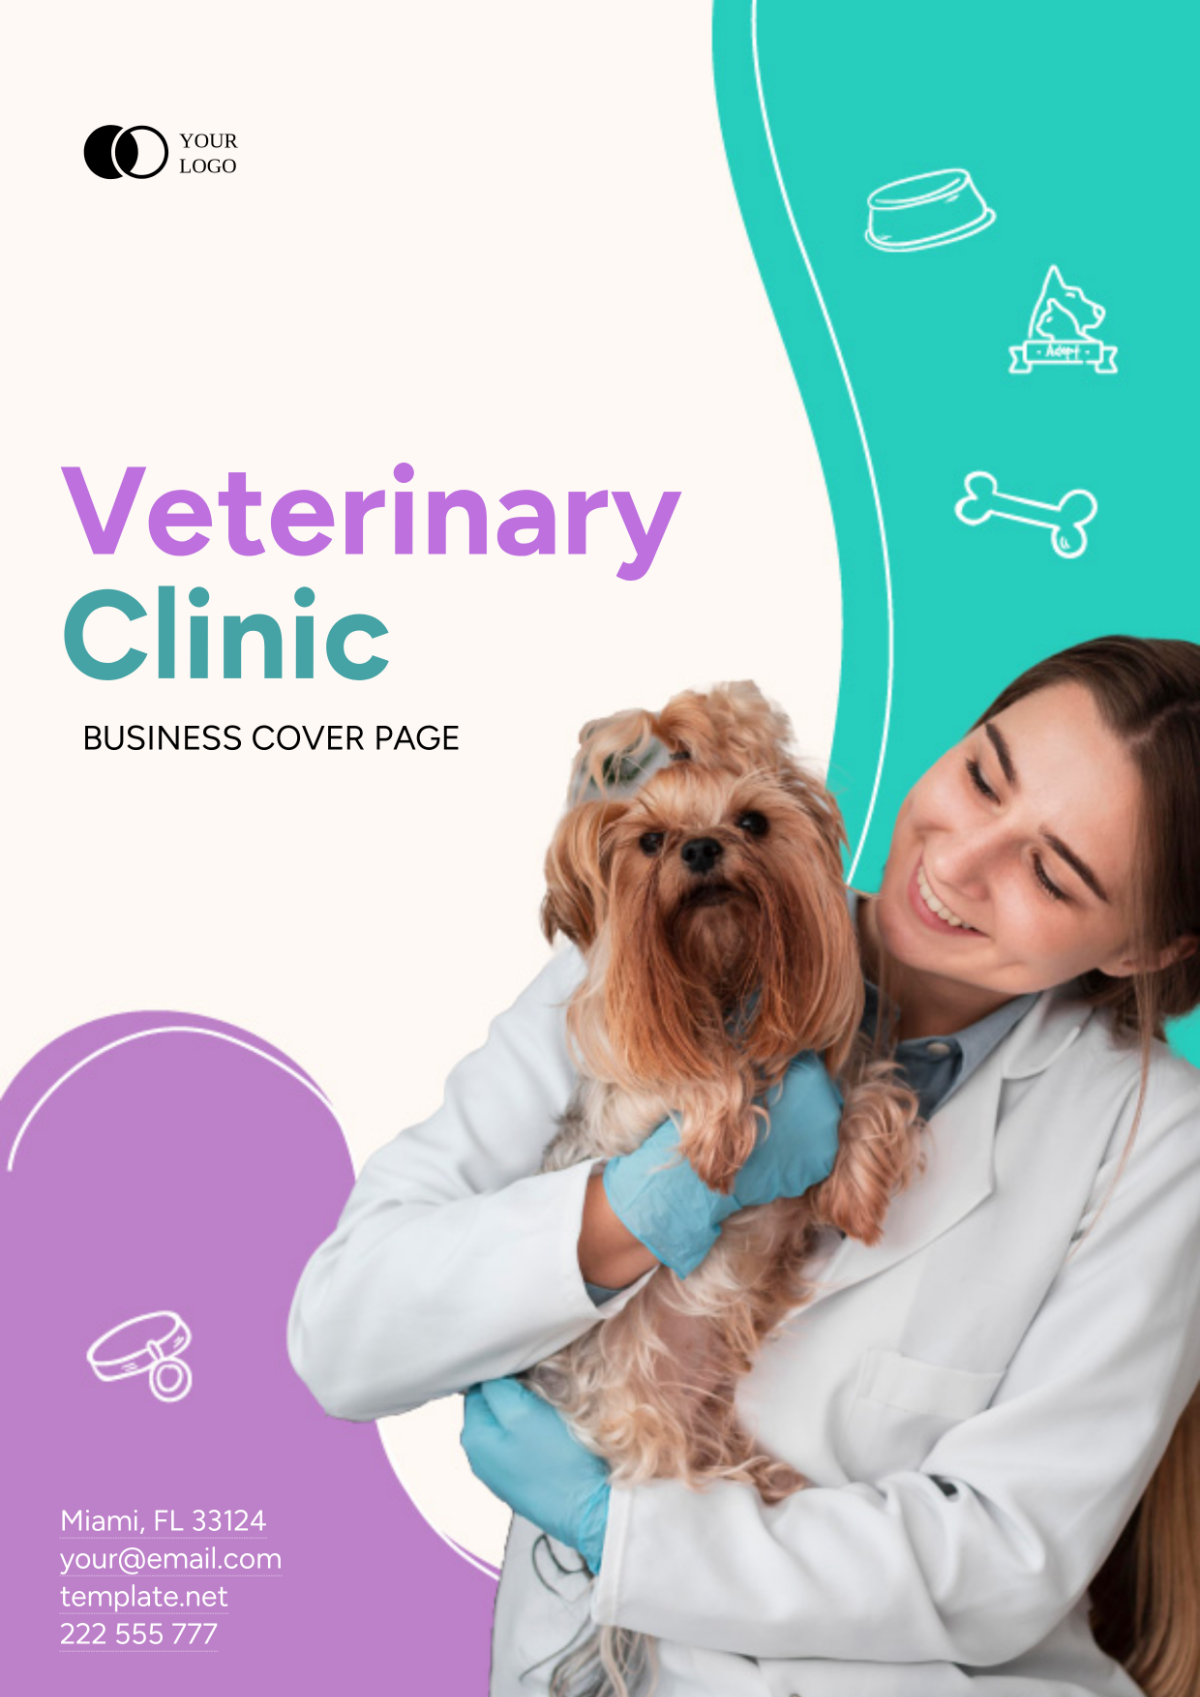 Veterinary Clinic Business Cover Page Template